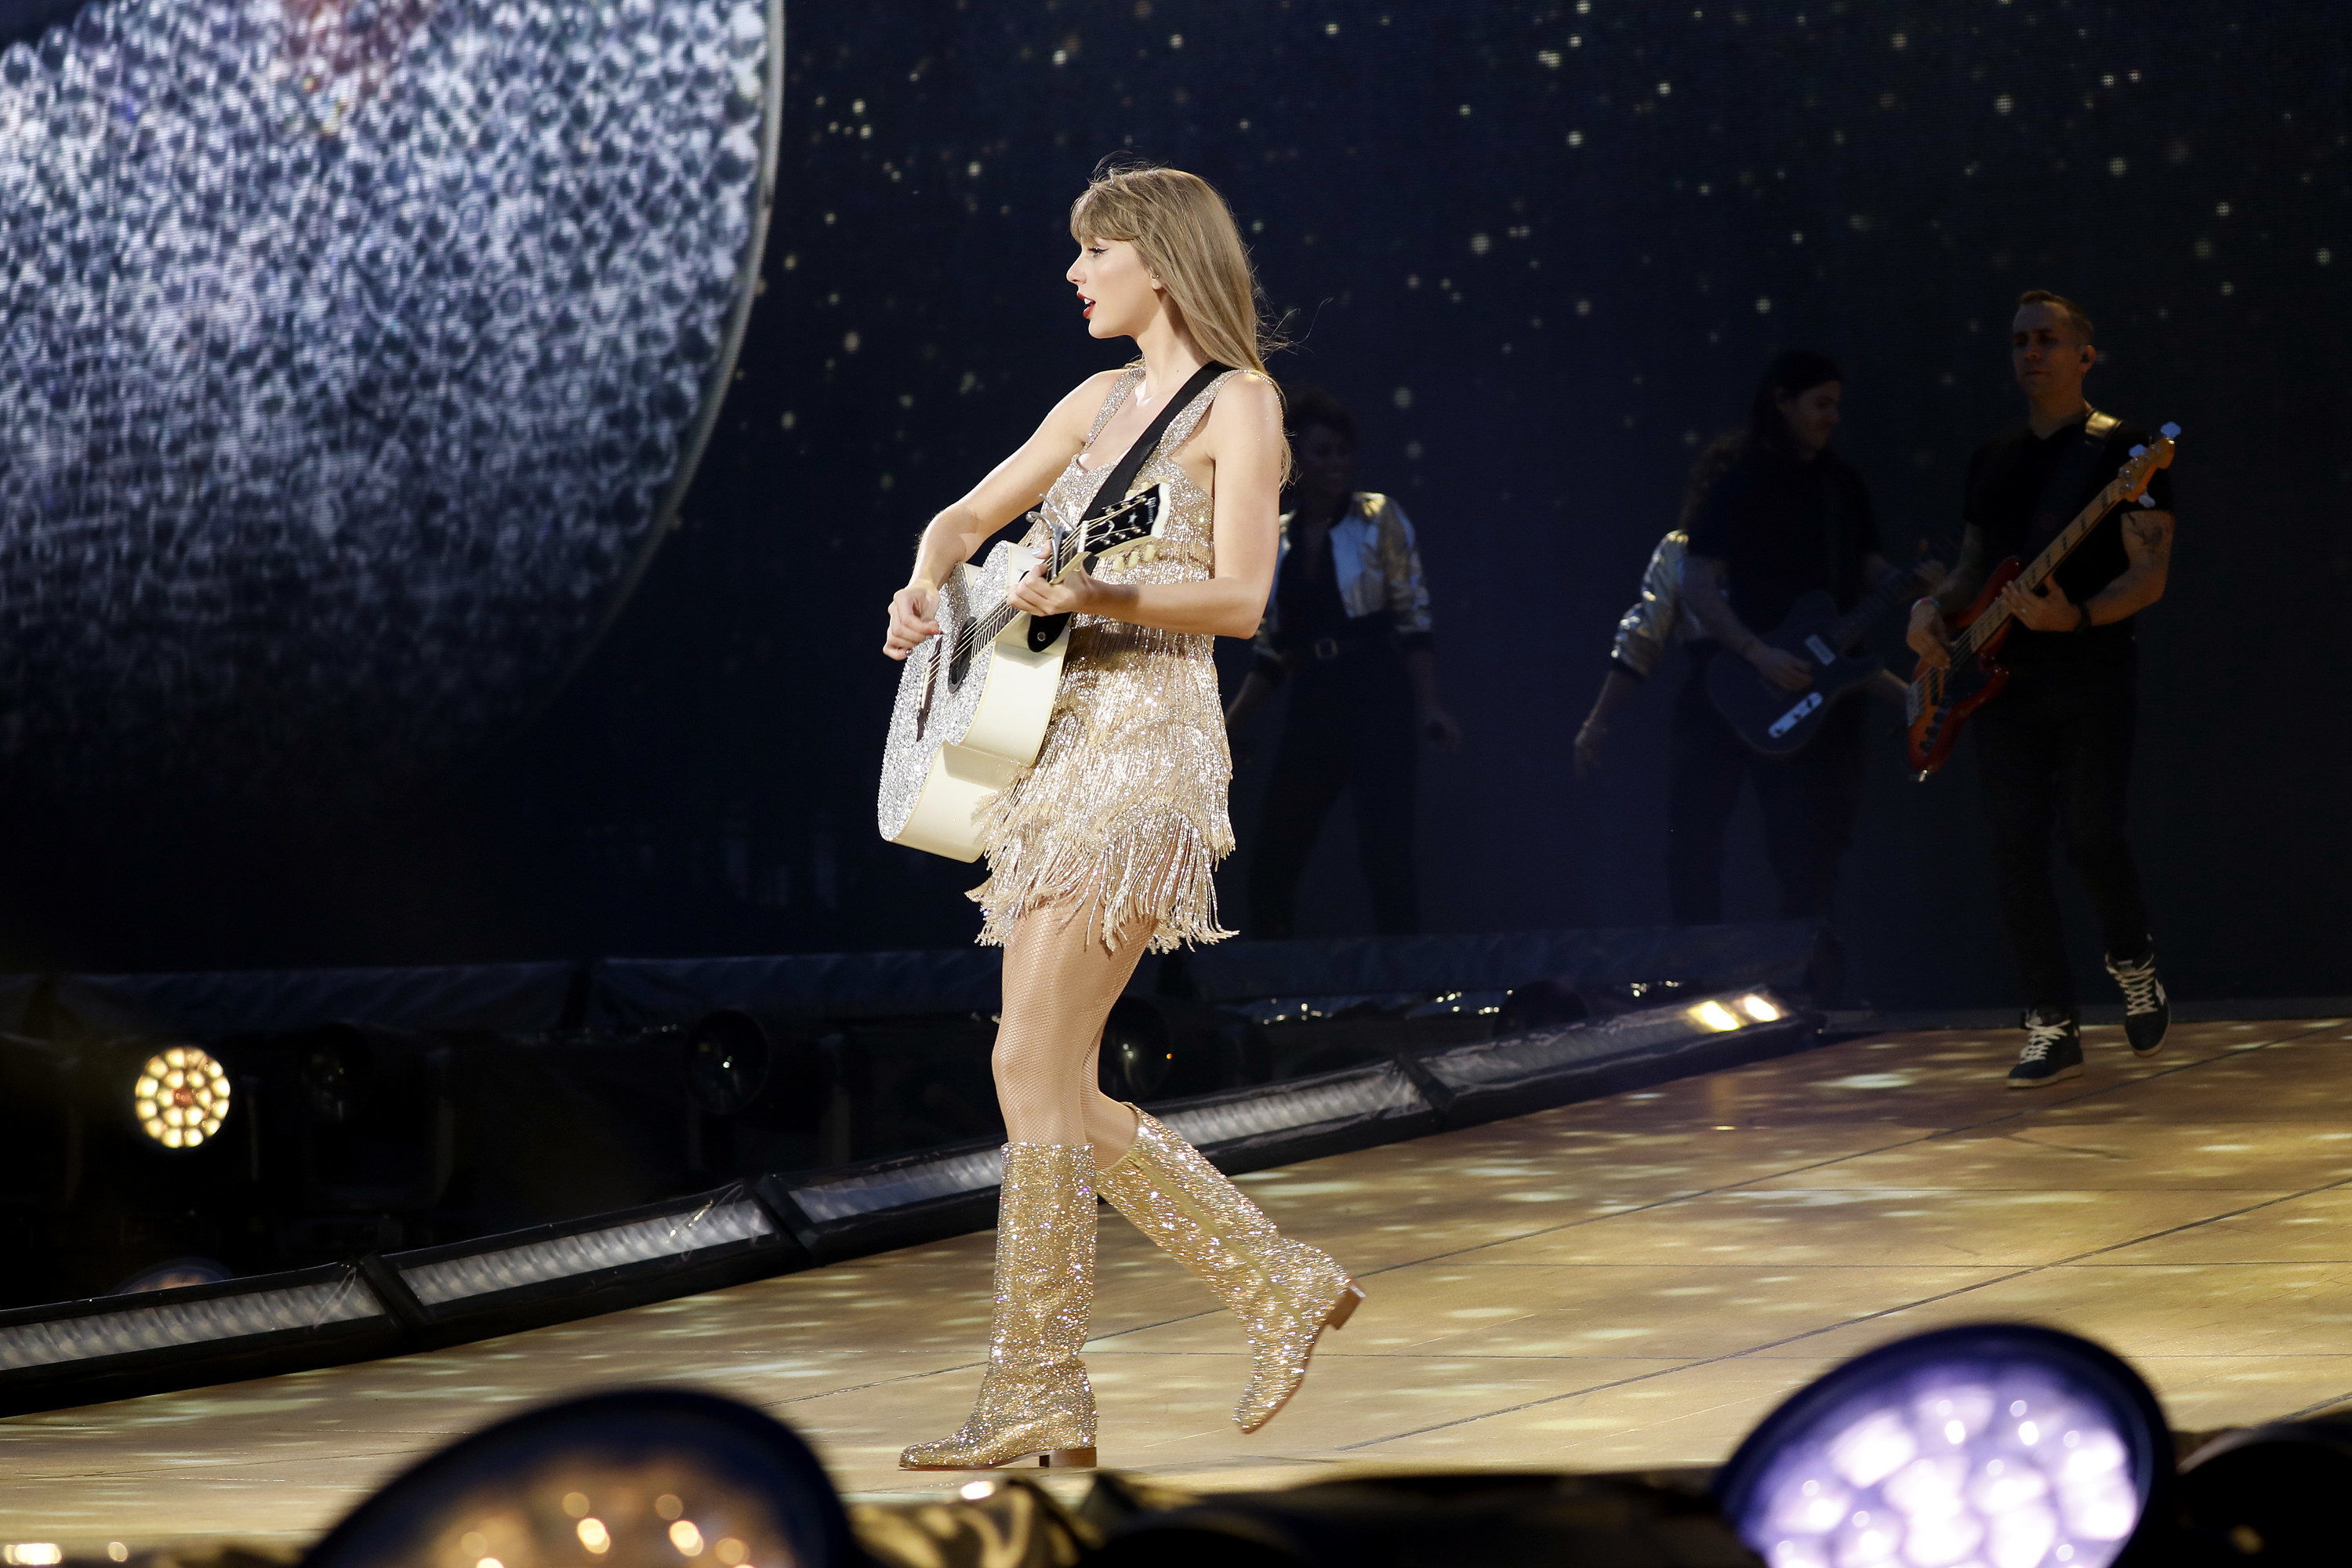 taylor playing guitar on stage